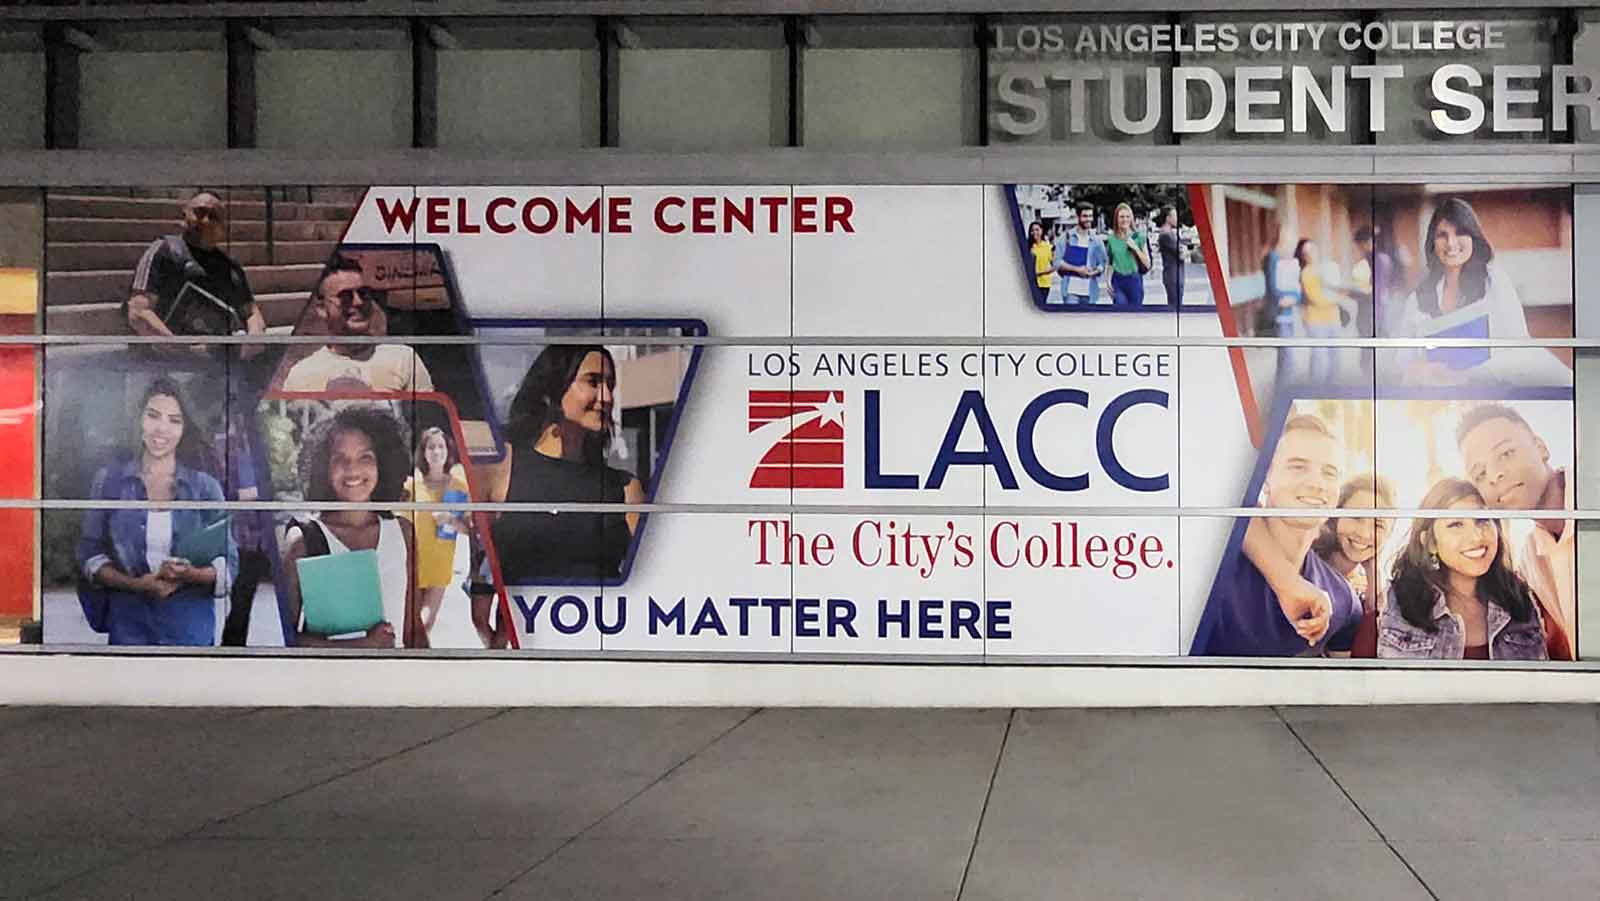 los angeles city college window decal applied to the facade